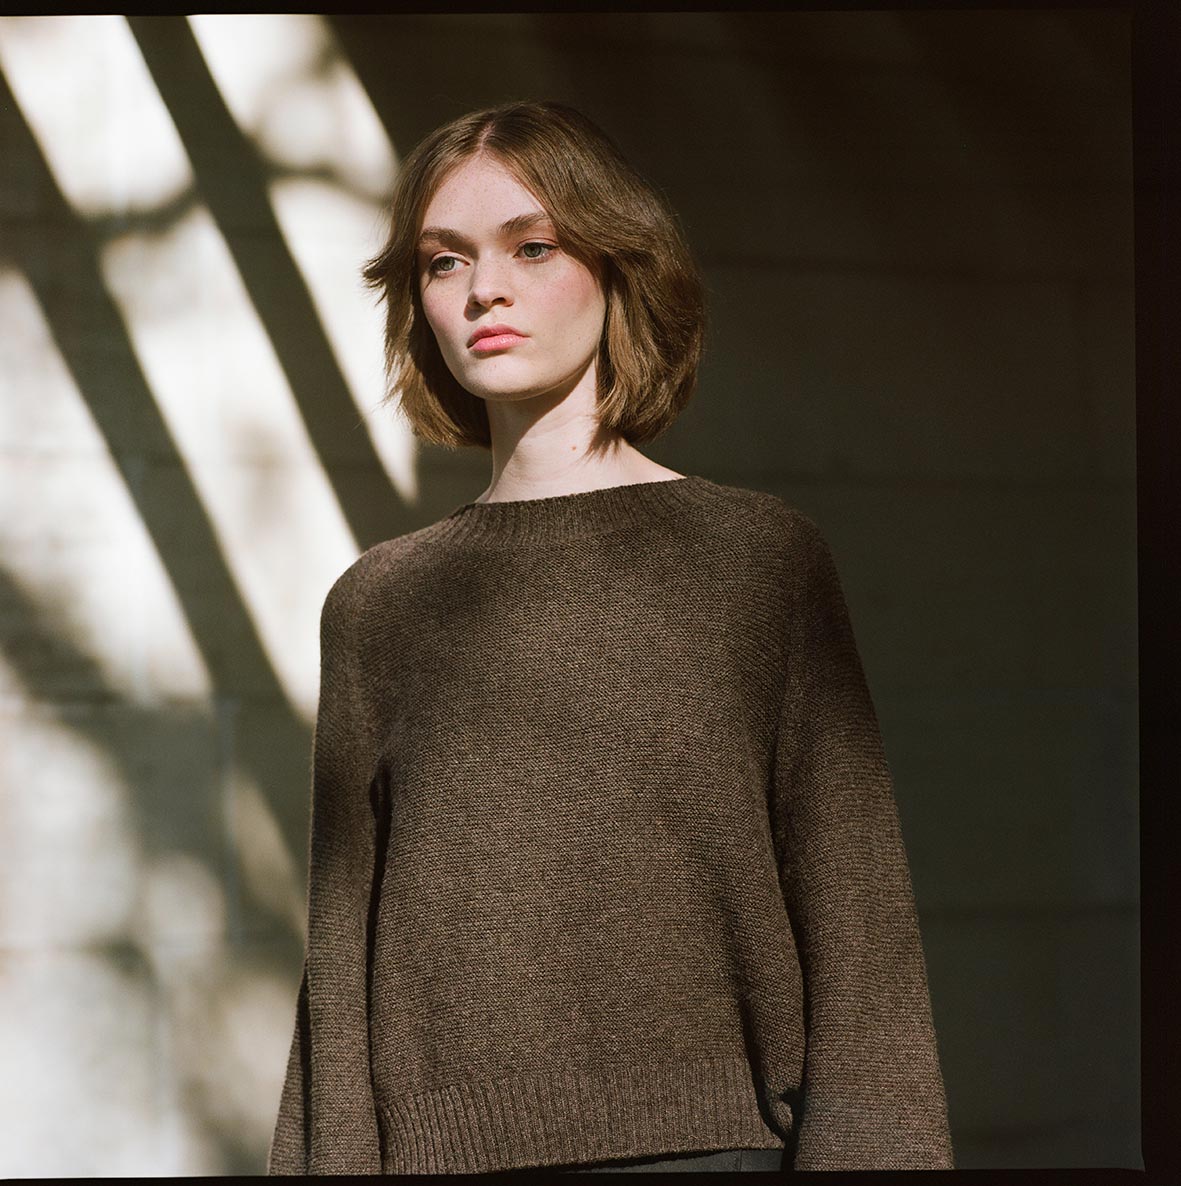 A woman wearing a Francie Poet Knit - Truffle sweater and black pants.